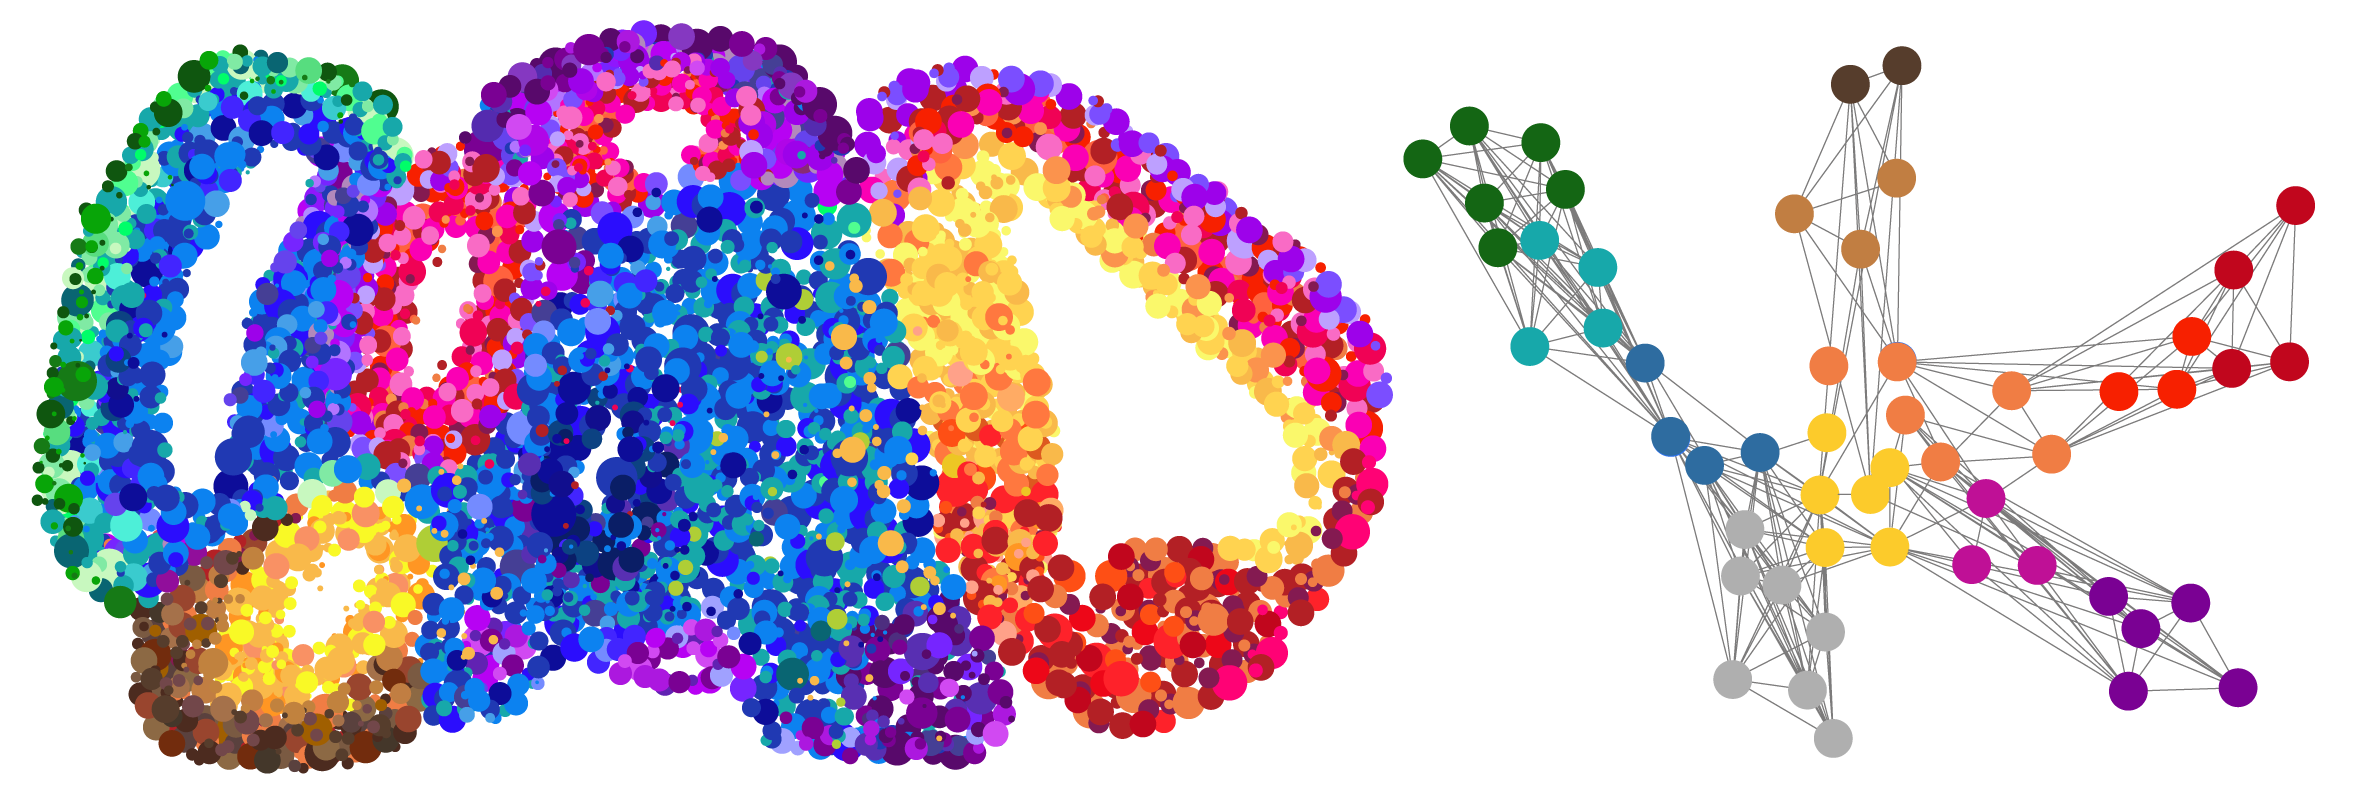 Map of a brain organoid: The colours of the cells shown as circles indicate different cell types. Right: Regulatory network of transcription factor genes that controls the development of a brain organoid.